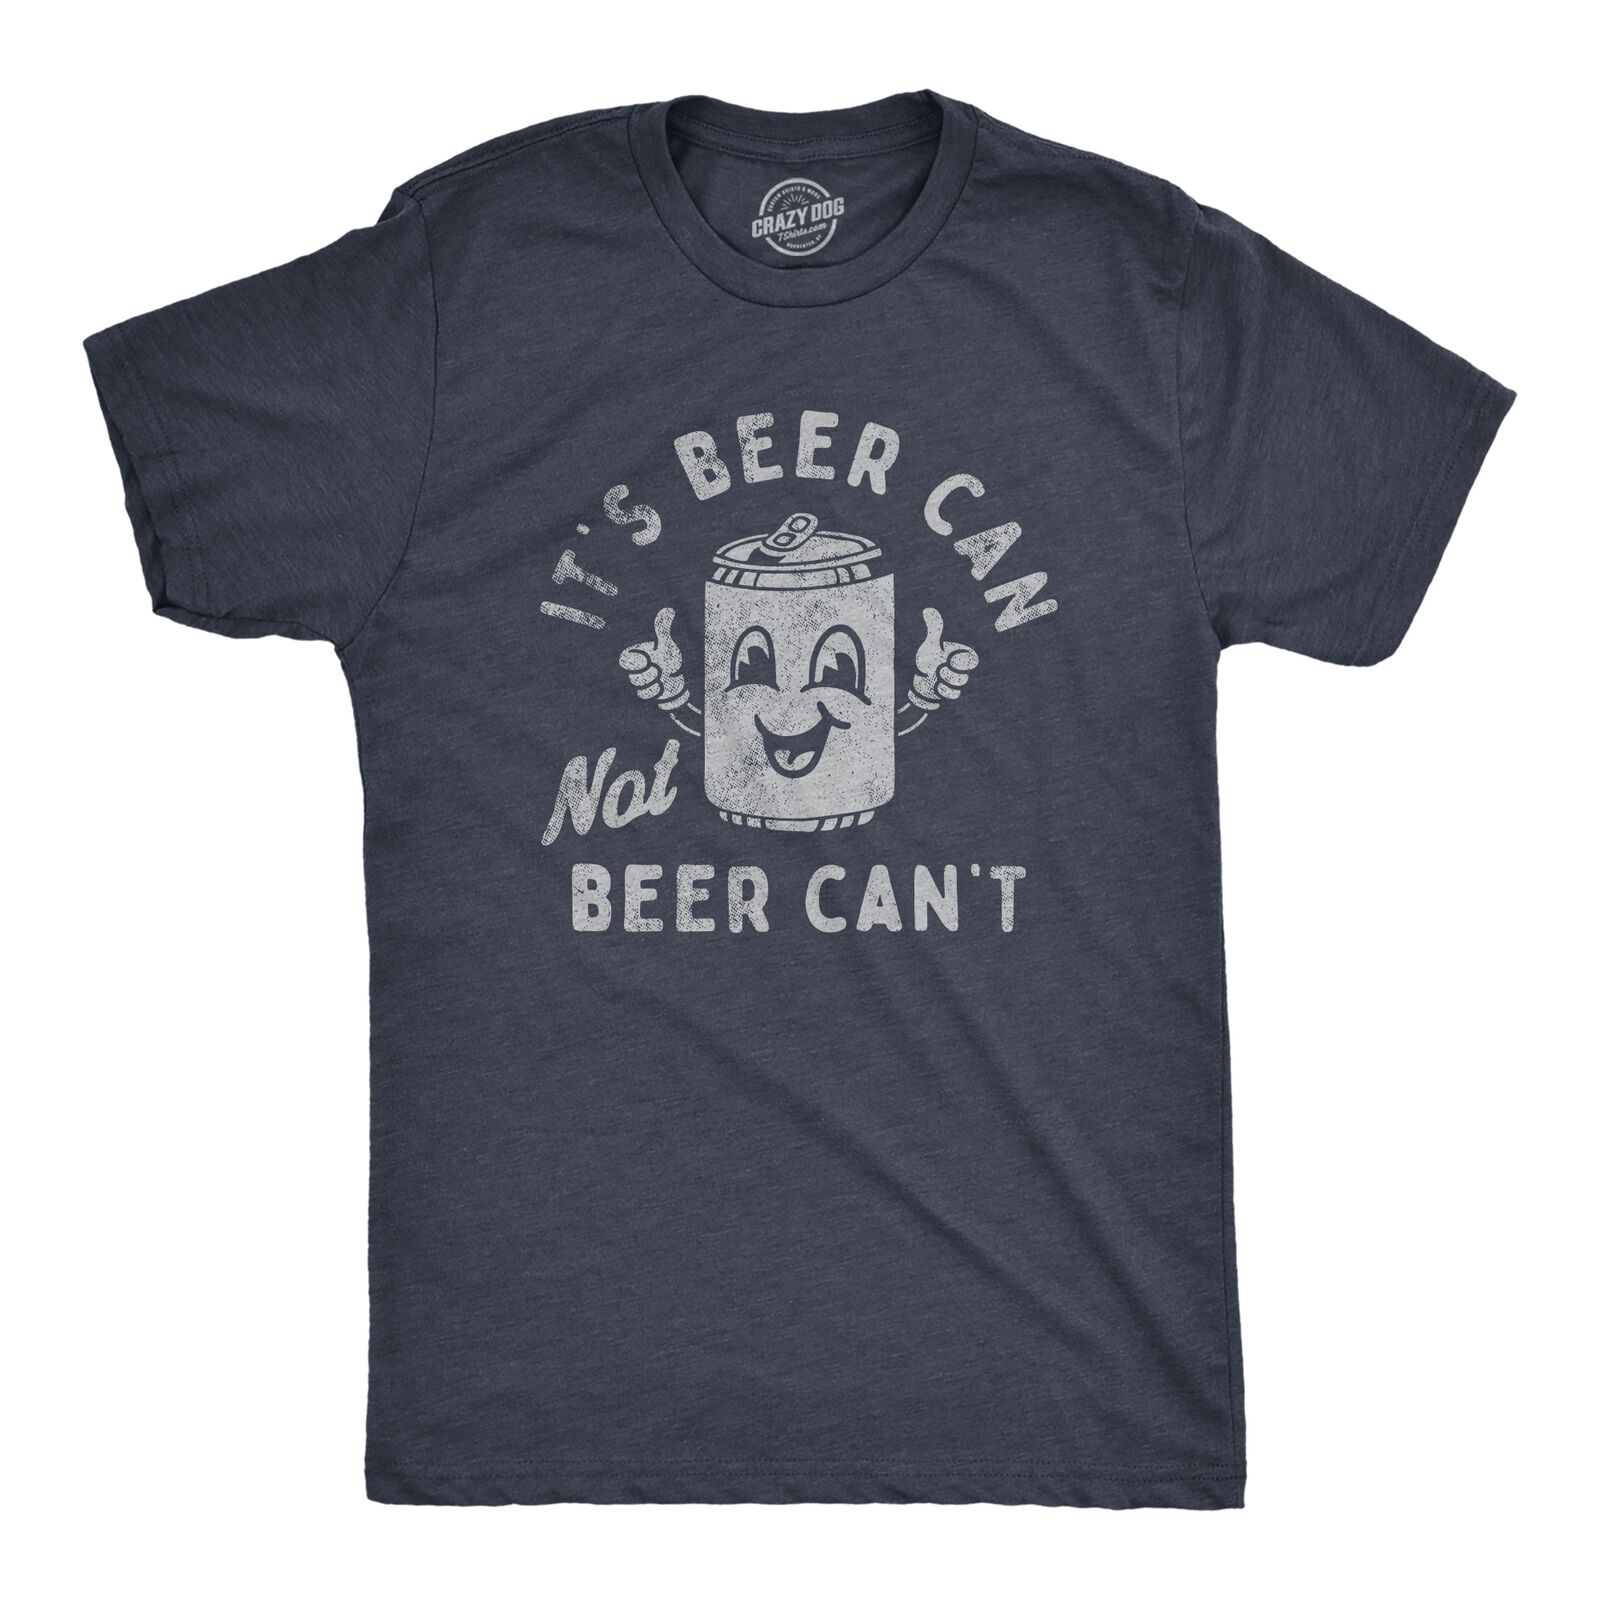 Mens Its Beer Can Not Beer Cant T Shirt Funny Drinking Lovers Positivity Joke